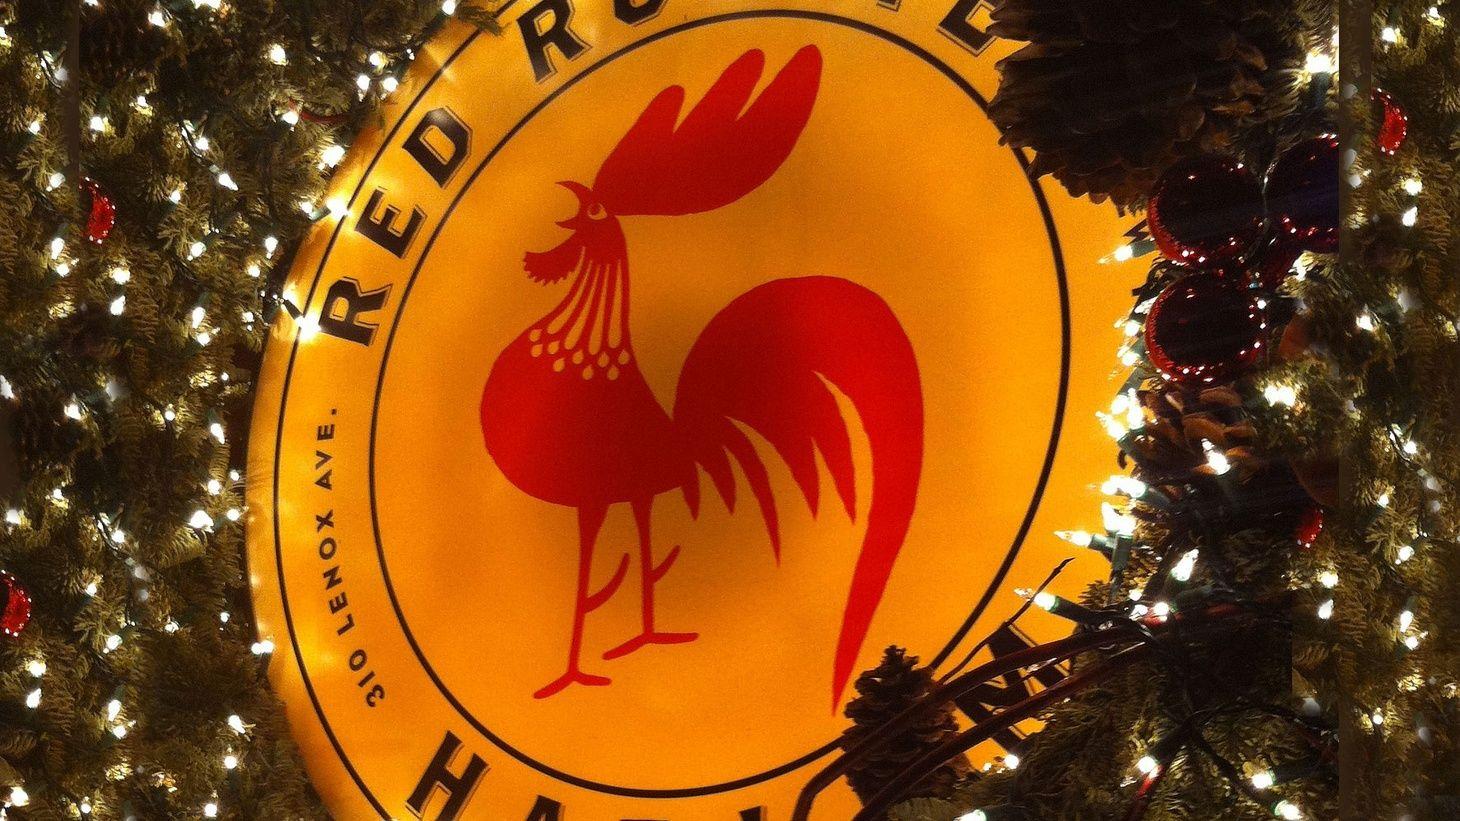 Black and Red Rooster Restaurant Logo - The Red Rooster, Fidel the foodie, P.Y.T. | Good Food | Food ...